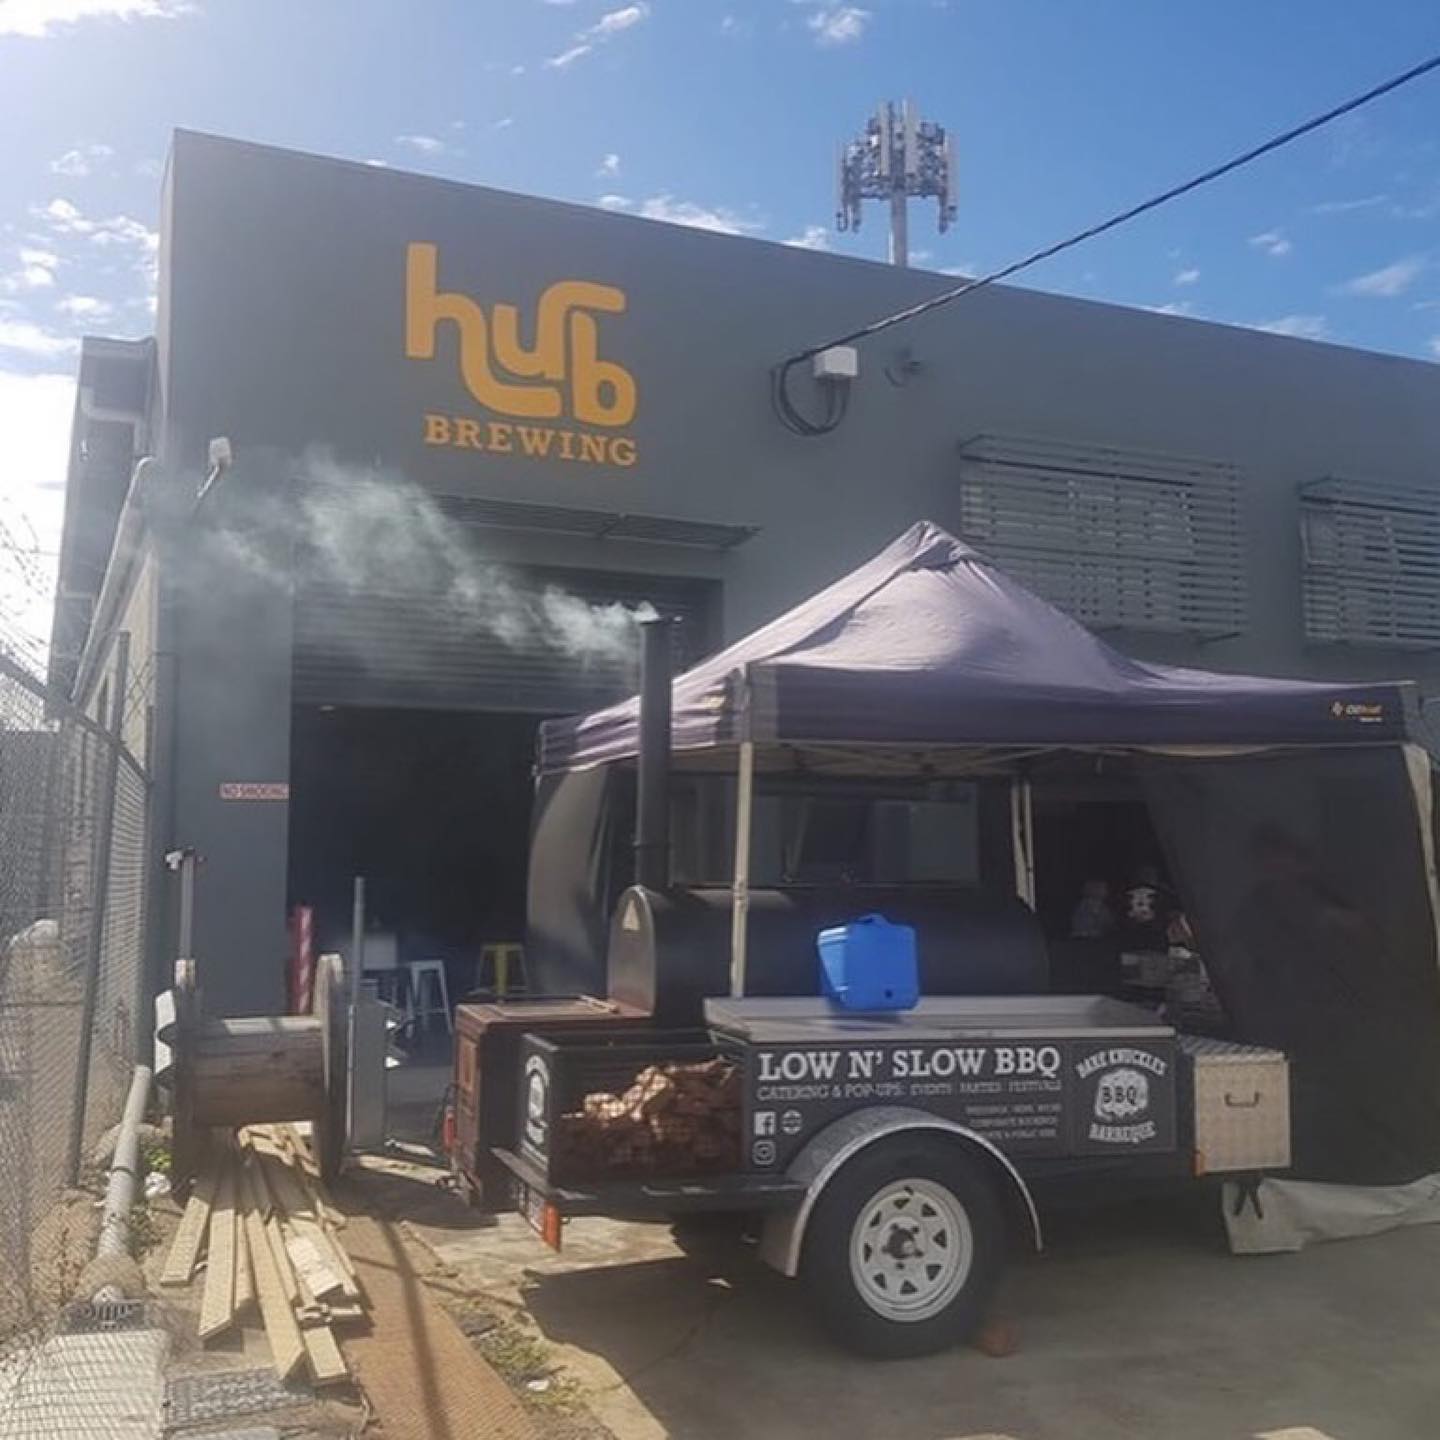 Today from midday.. see you at @hubbrewing - till Sold Out.. 🏻 -#getsome #lownslow #lownslowbbq #barbeque #barbecue #itsgoodbbq #brisket #pork #lamb #chicken #brisbane #queensland #australia #sleepwhenimdead #allinnbrewingco #traditionalbbq #bareknucklesbbq #bareknucklesbarbeque #bareknucklesbarbecue